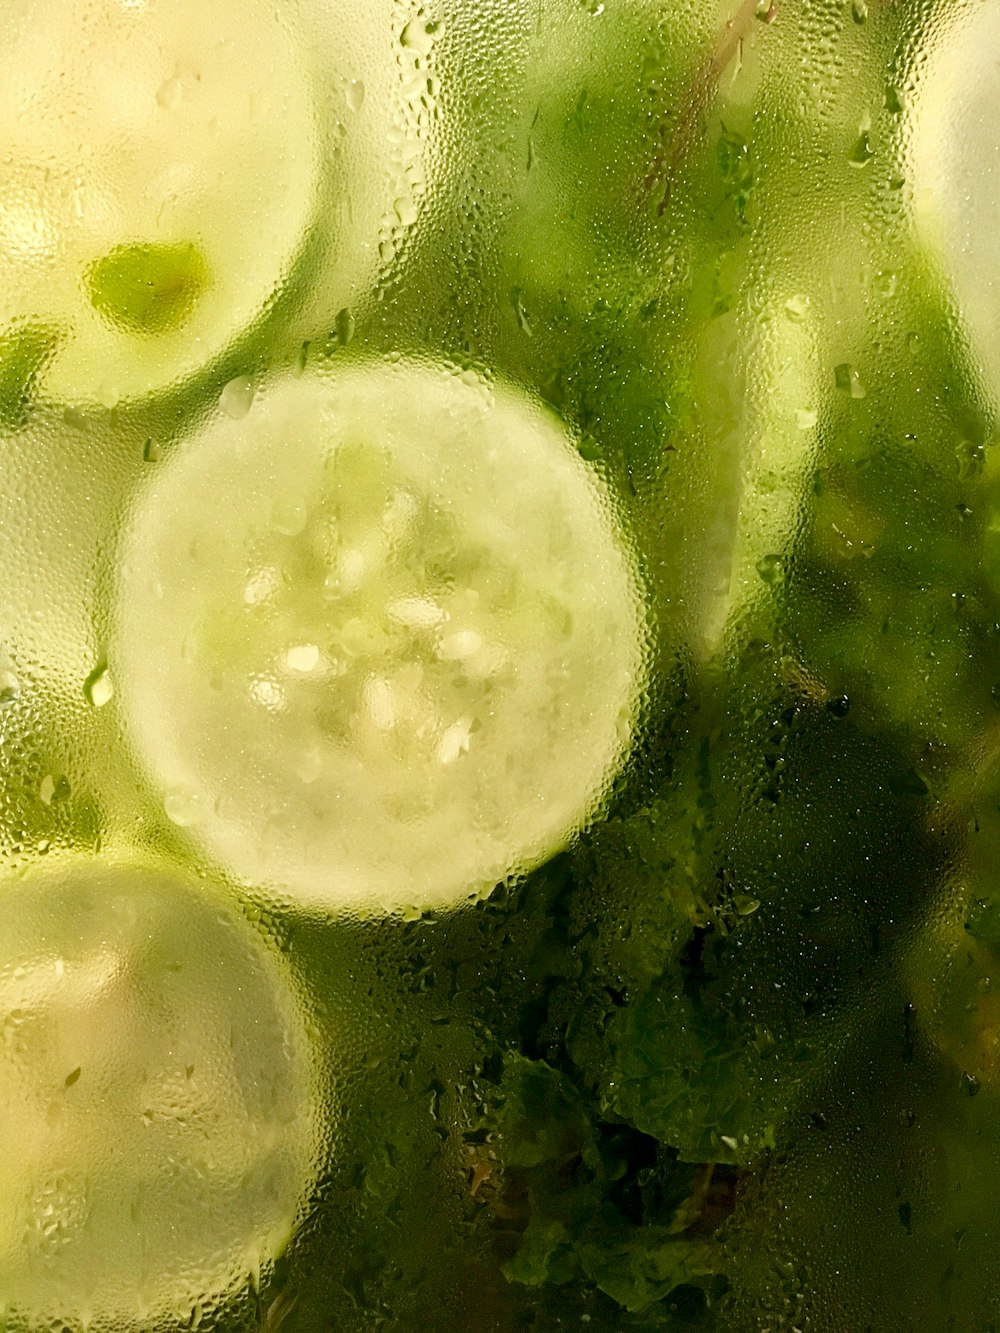 sliced cucumber and green leafy vegetables in container with moist